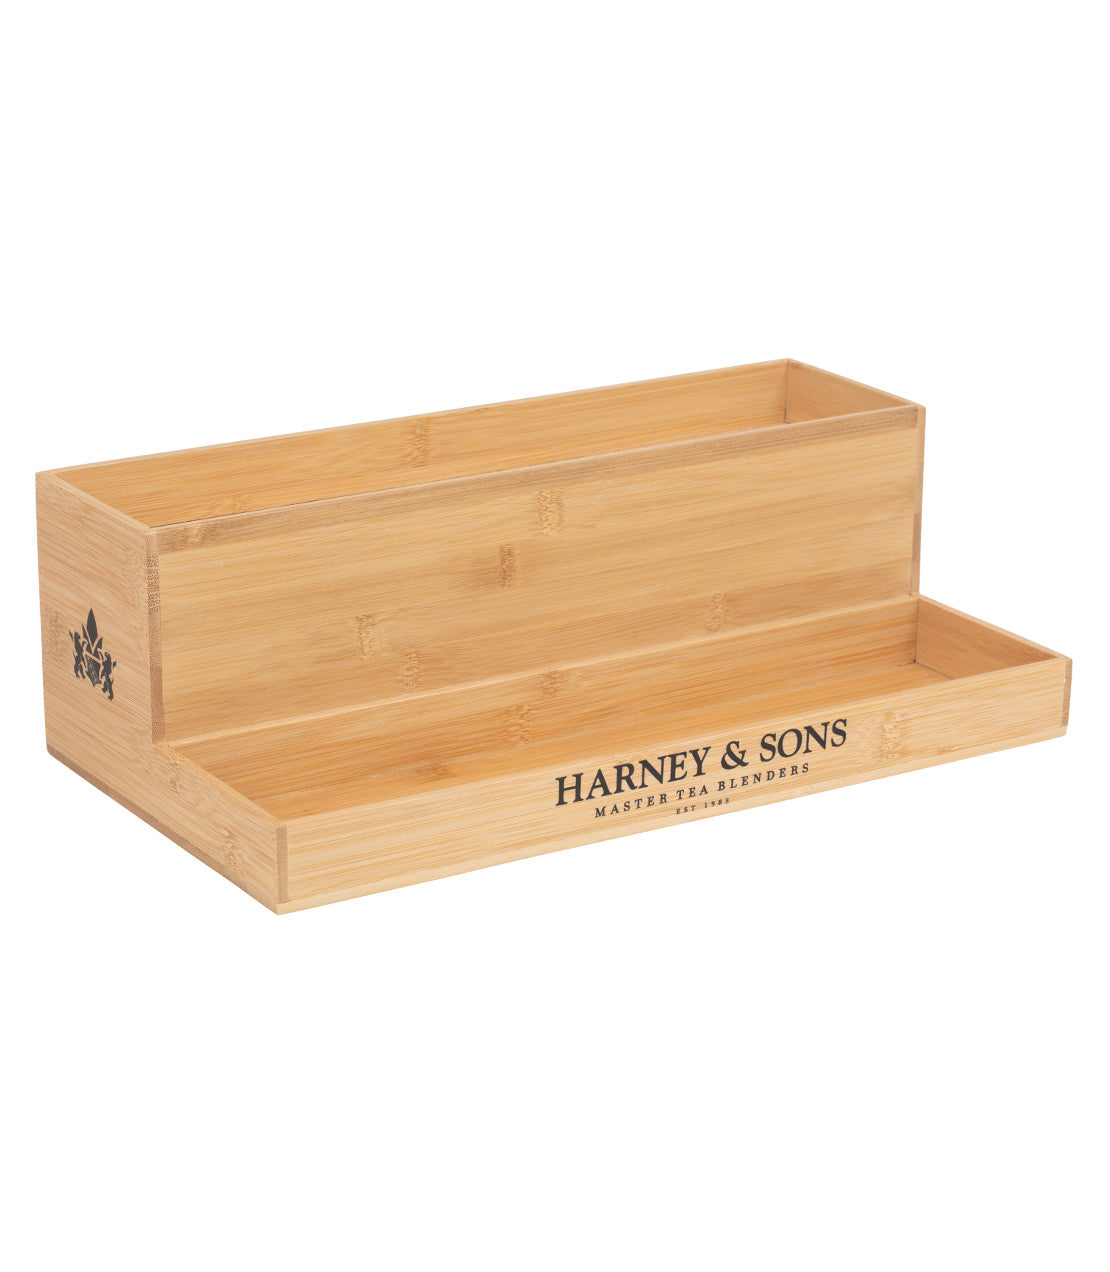 Harney & Sons Bamboo Display Rack – 8 HT, Classic or 8 oz tins